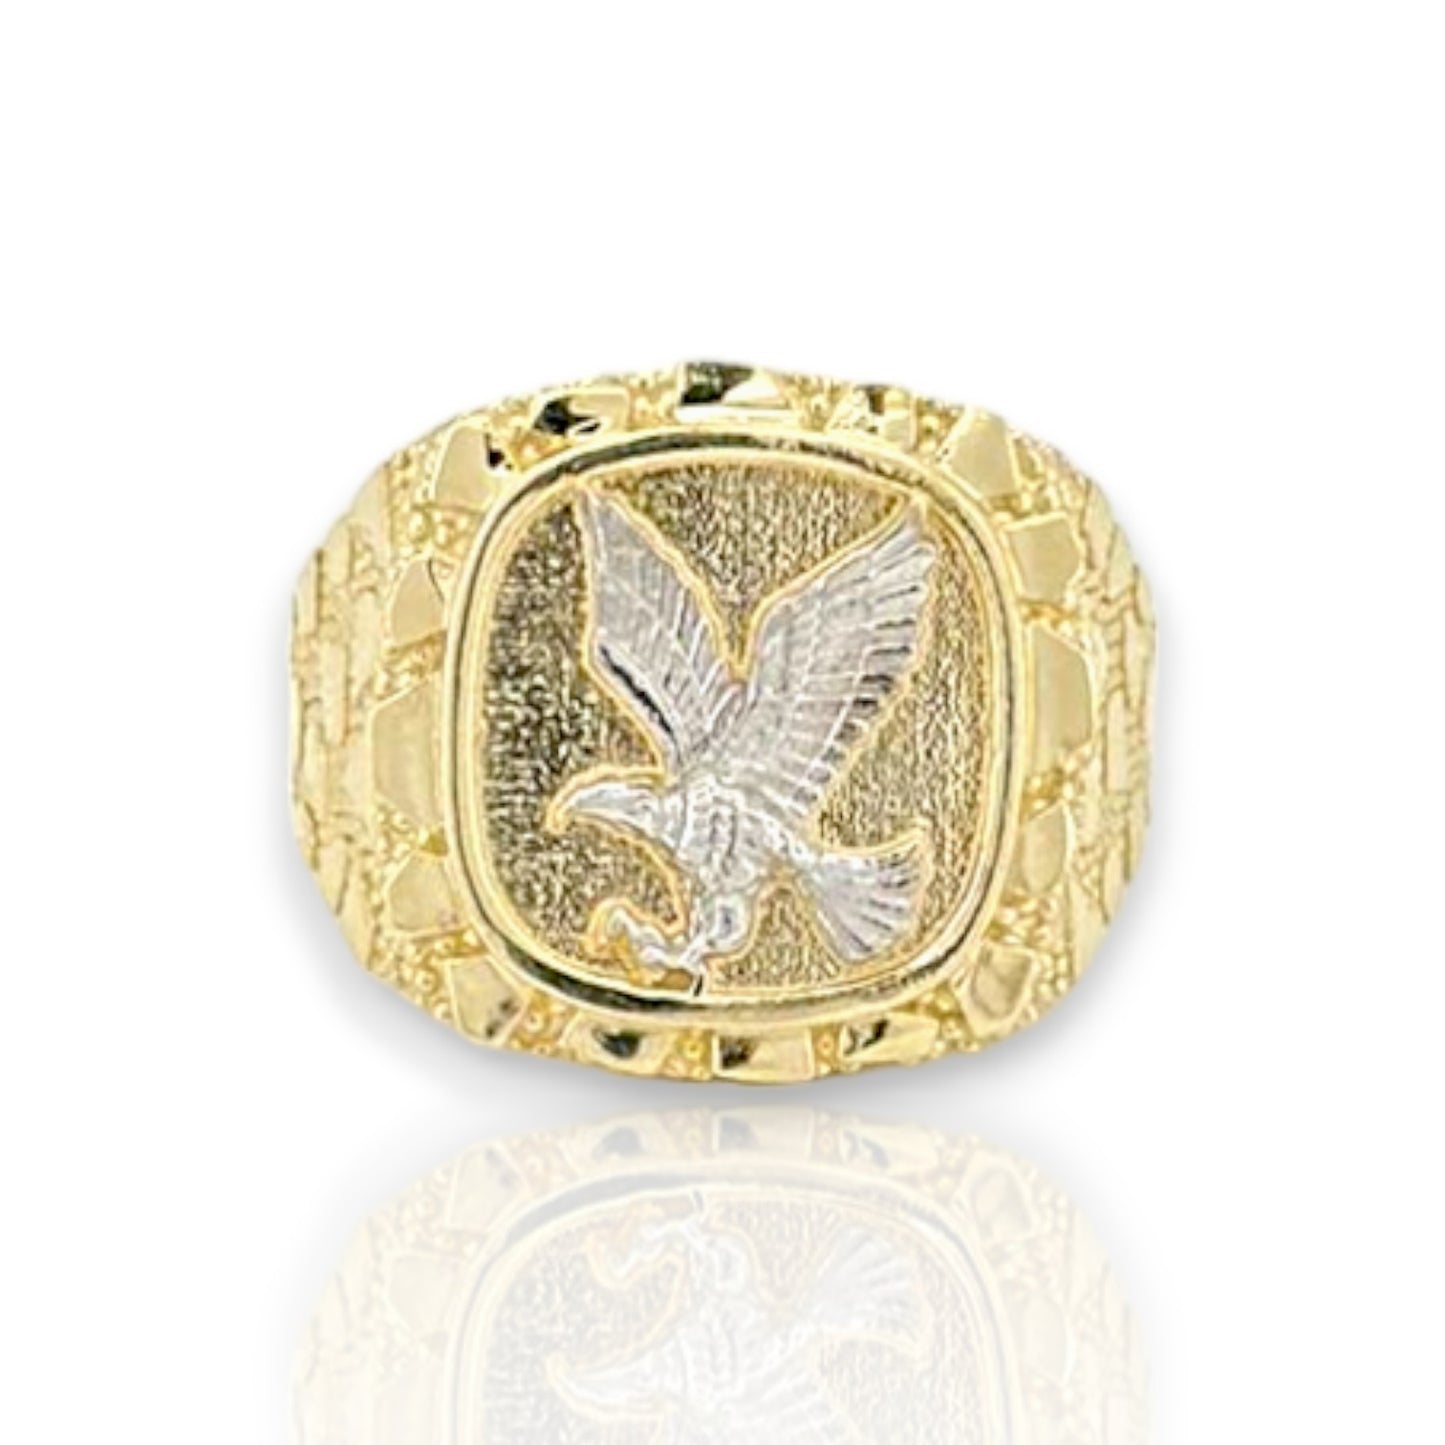 Eagle Nugget Ring - 10k Yellow Gold